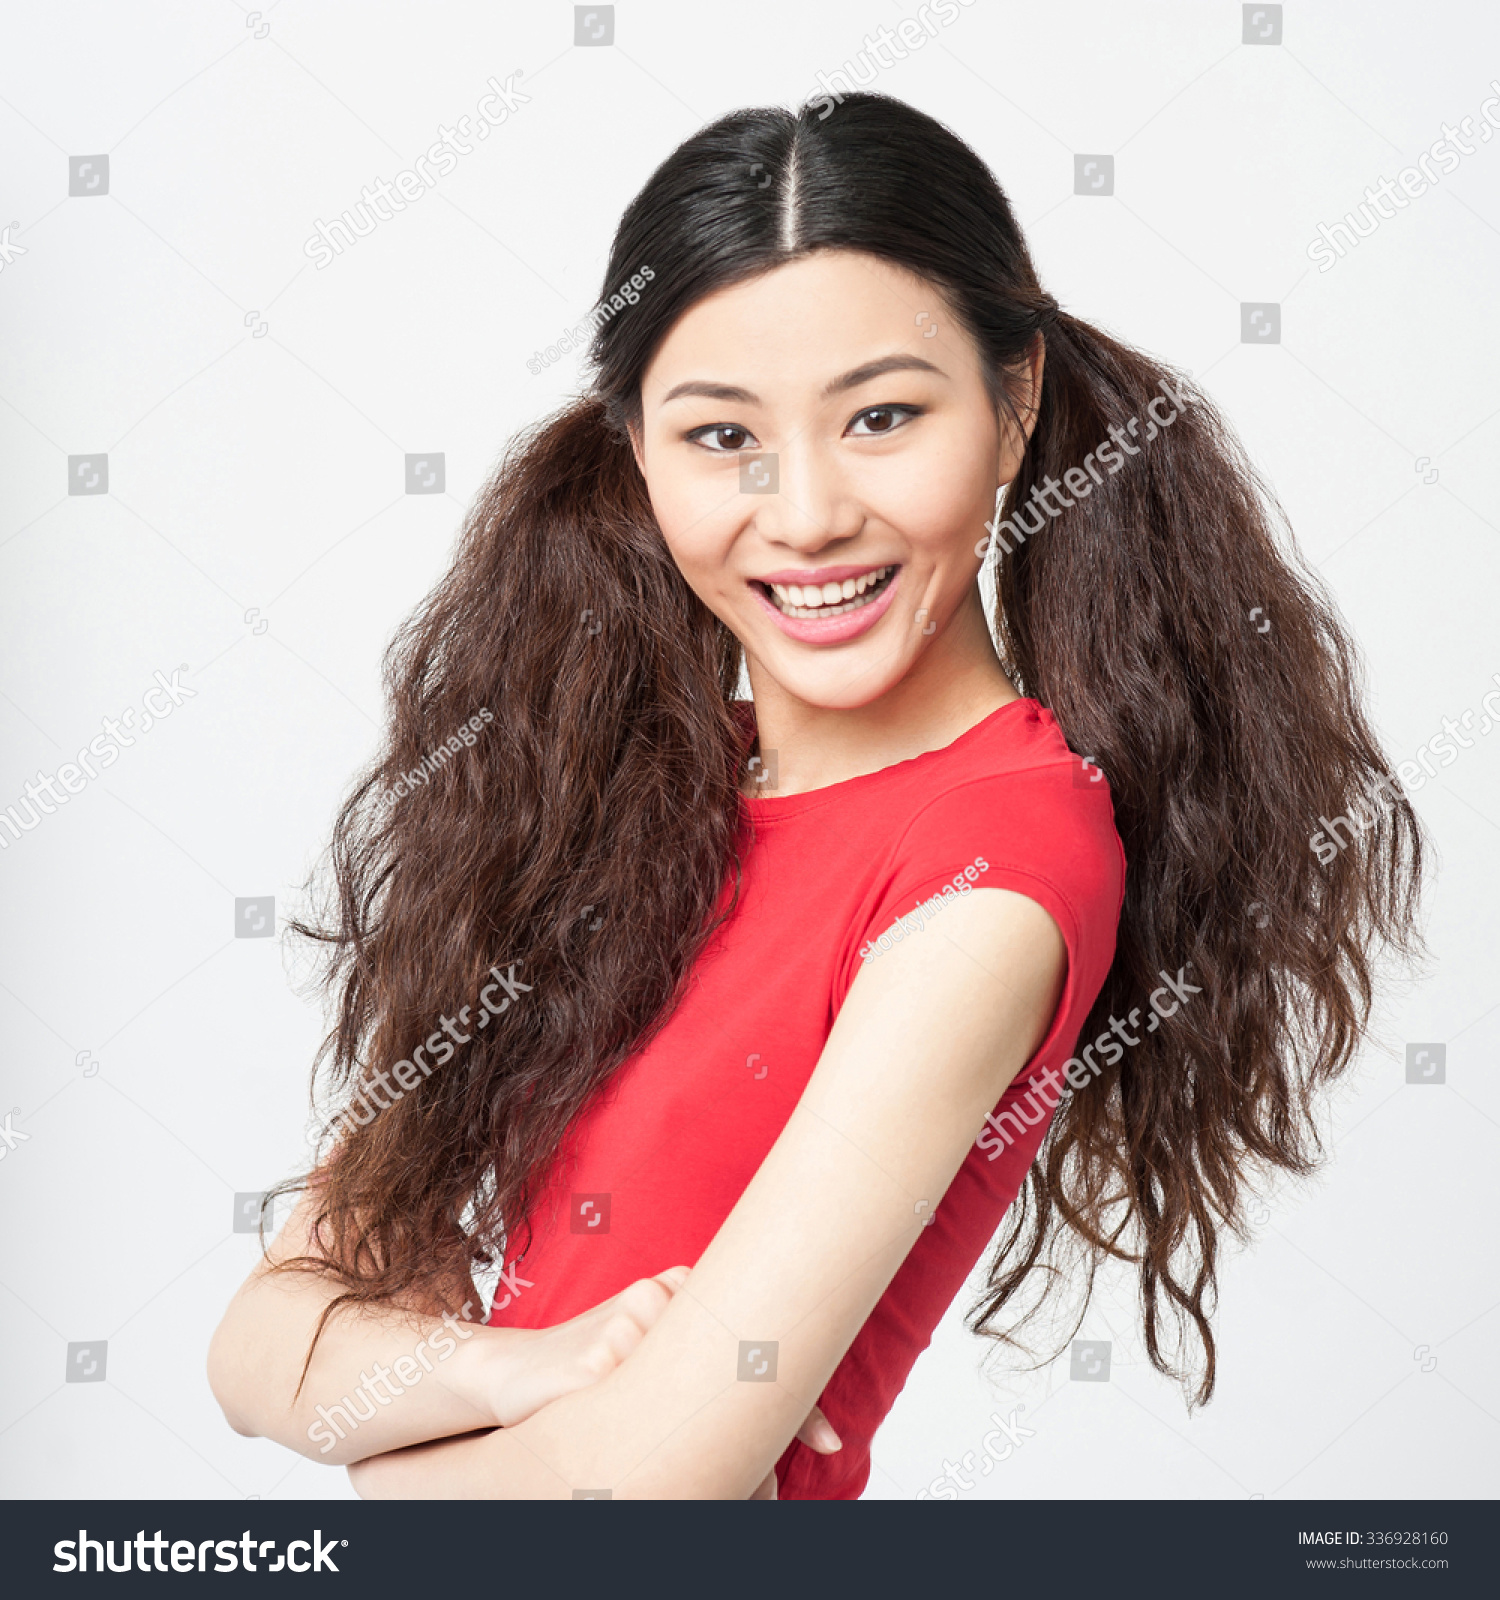 5,655 Two ponytail girl Images, Stock Photos & Vectors | Shutterstock